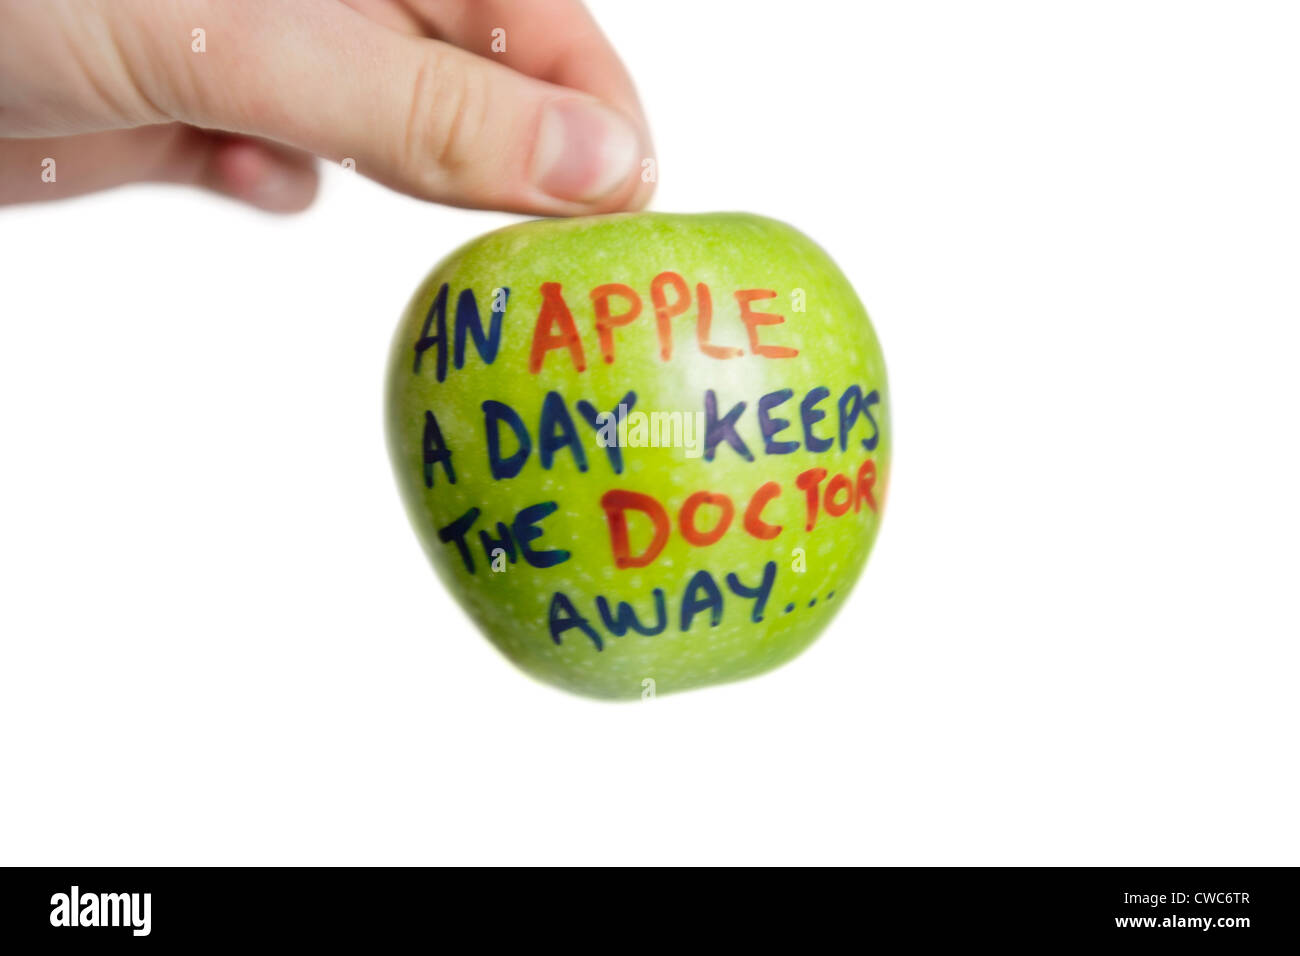 Cropped image of hand holding a granny smith apple with sayings text over white background Stock Photo